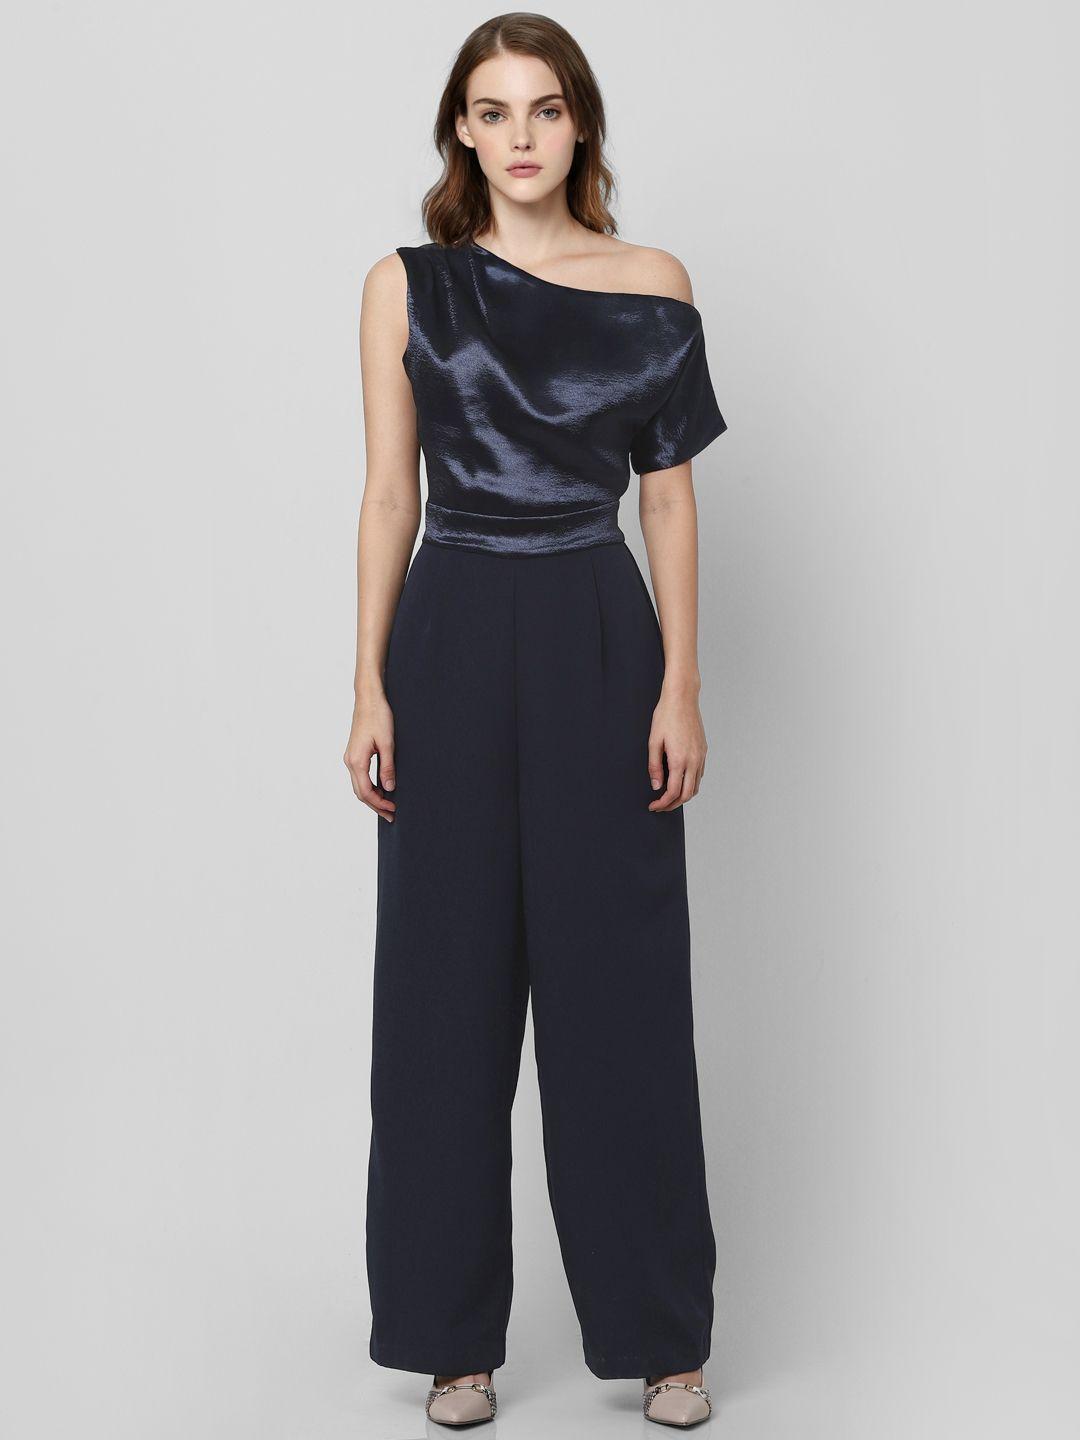 vero moda marquee collection women blue solid one-shoulder basic jumpsuit